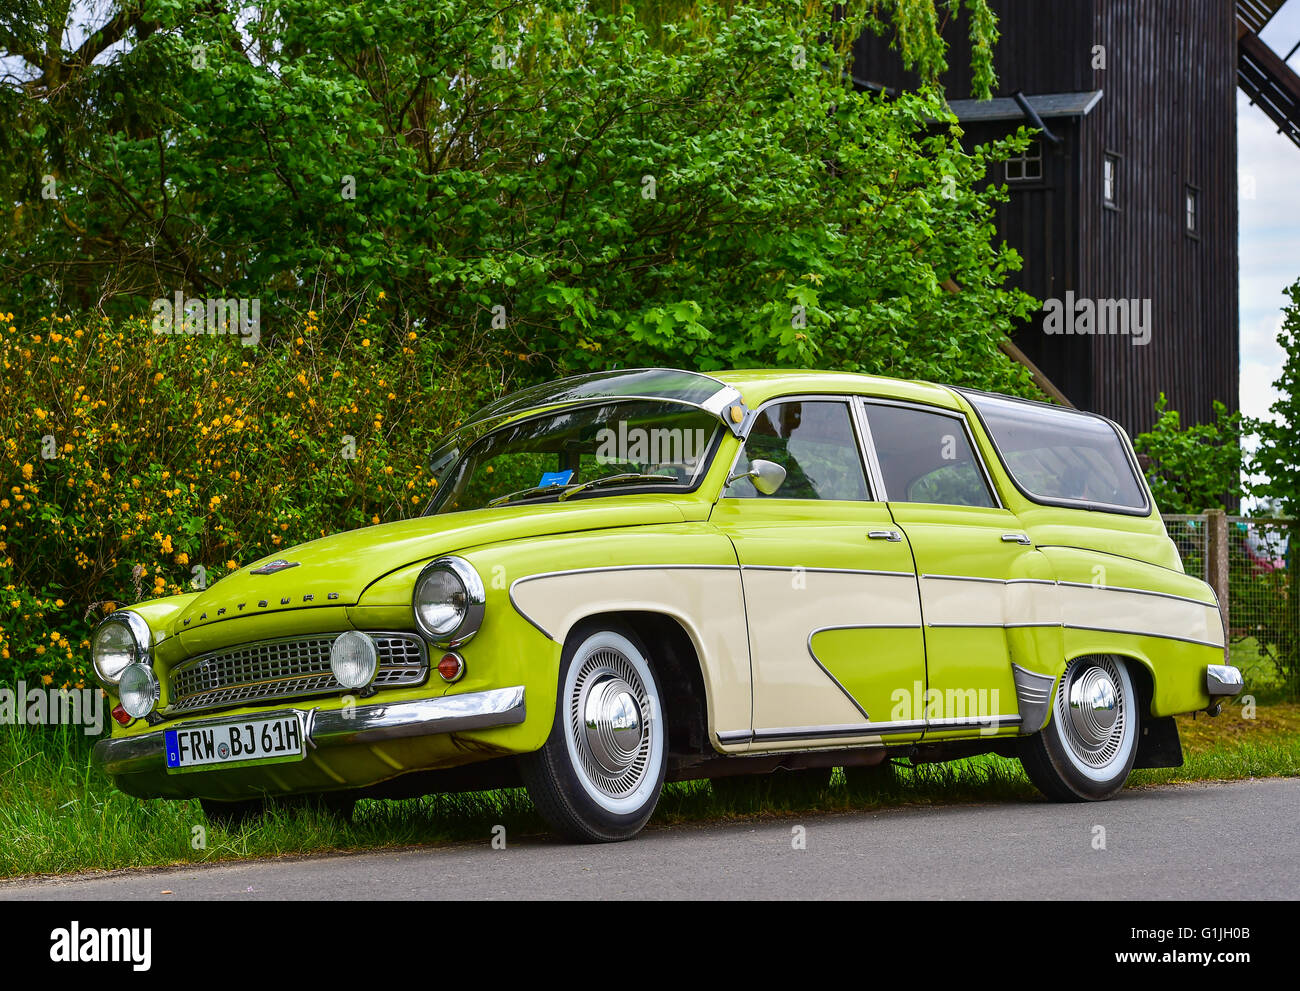 Wilhelmsaue, Germany. 16th May, 2016. A Wartburg 311 car from 1961 pictured in Wilhelmsaue, Germany, 16 May 2016. The Wartburg 311 was manufacturered by the former Eisenach car manufacturing plant of the German Democratic Republic (GDR) from 1955 to 1965. Photo: PATRICK PLEUL/dpa/Alamy Live News Stock Photo